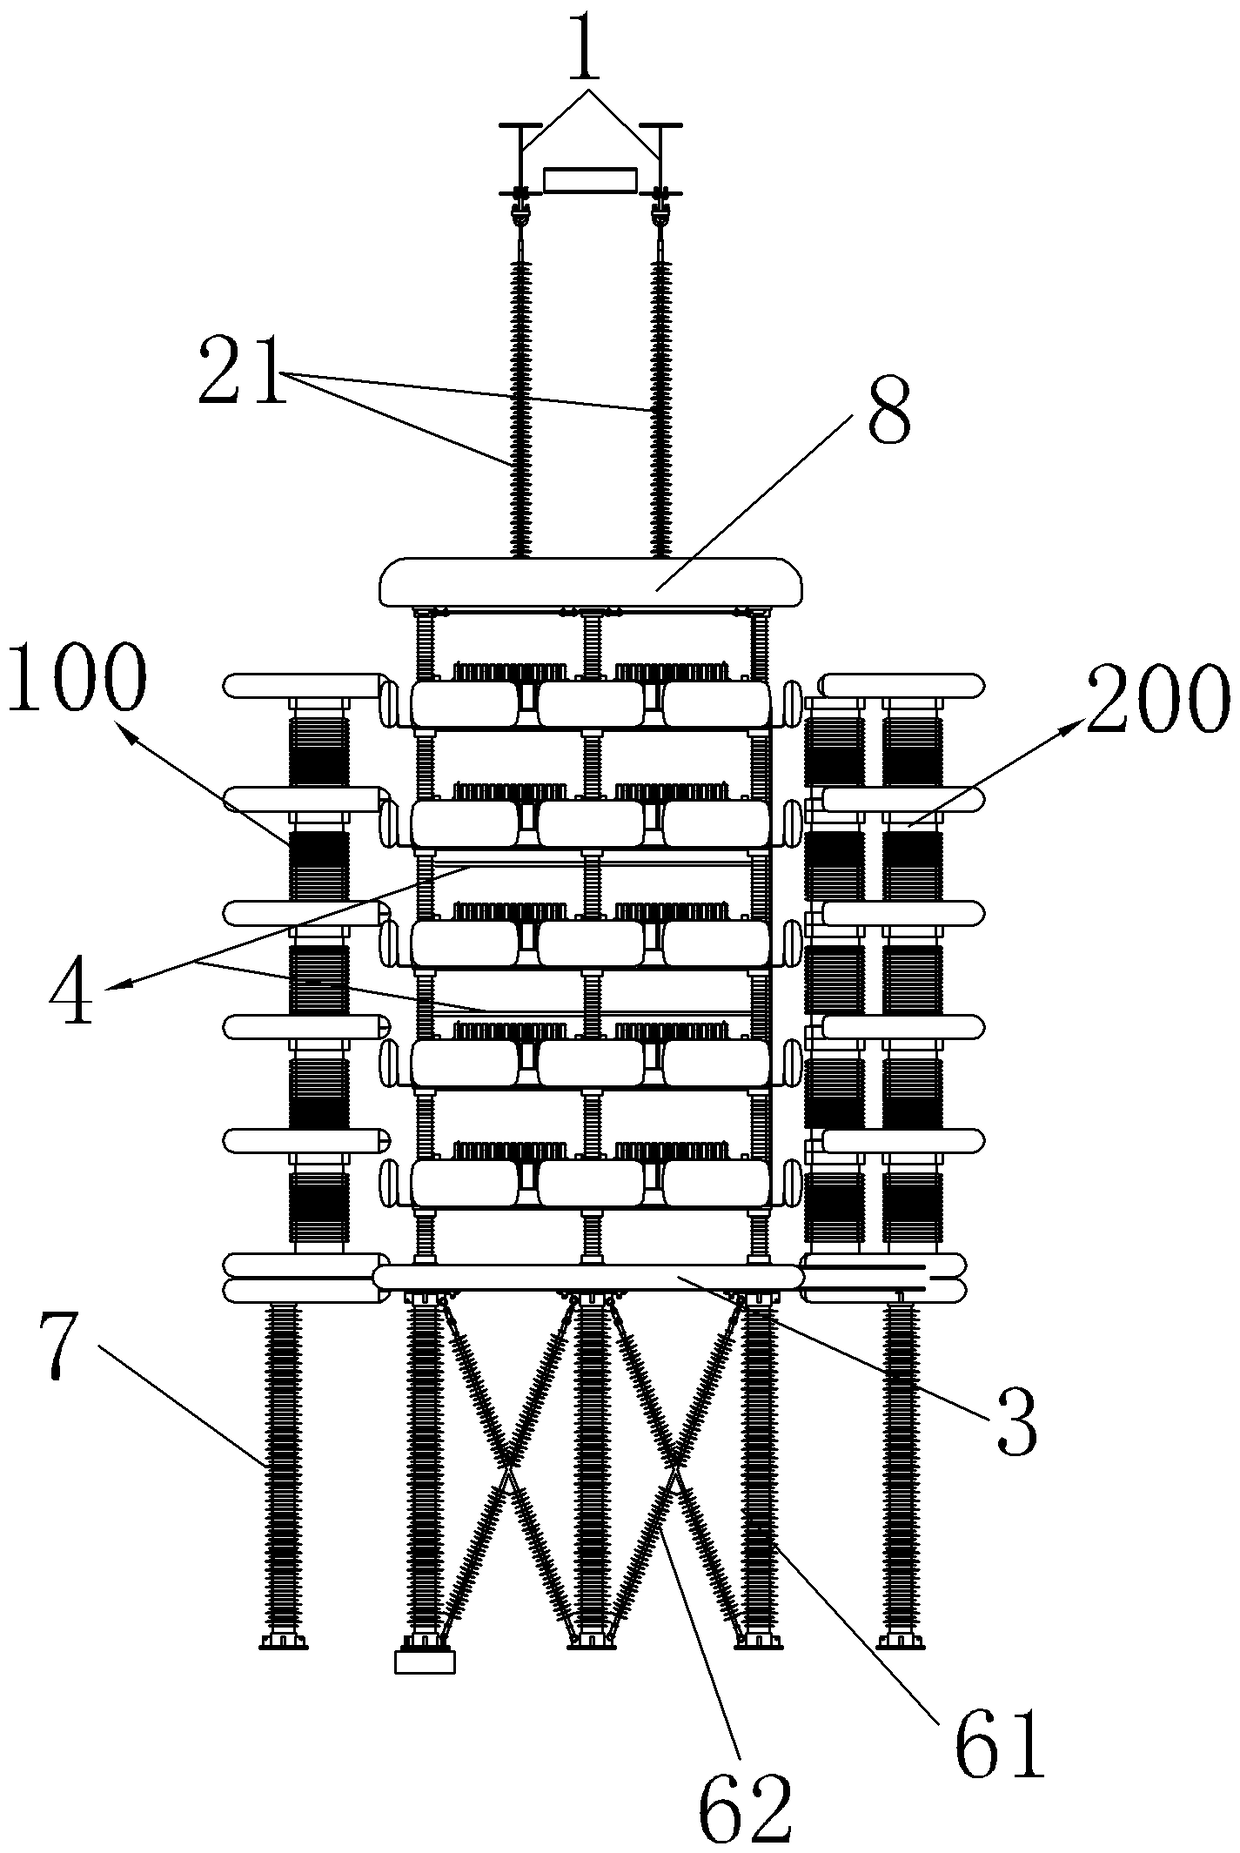 A high-voltage DC circuit breaker valve tower structure